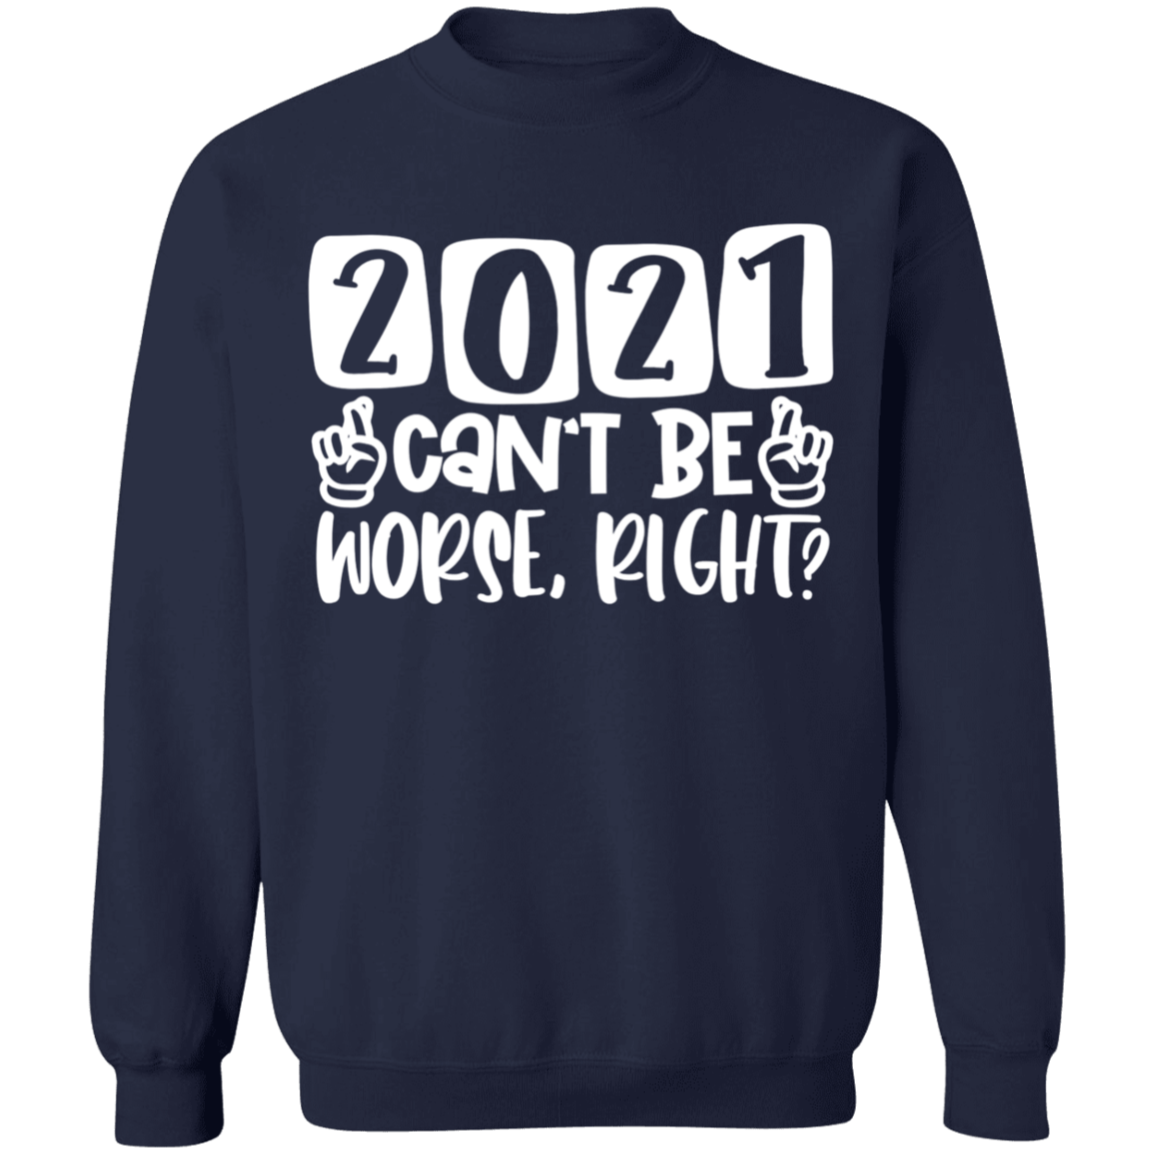 2021 Can't Be Worse Right Apparel